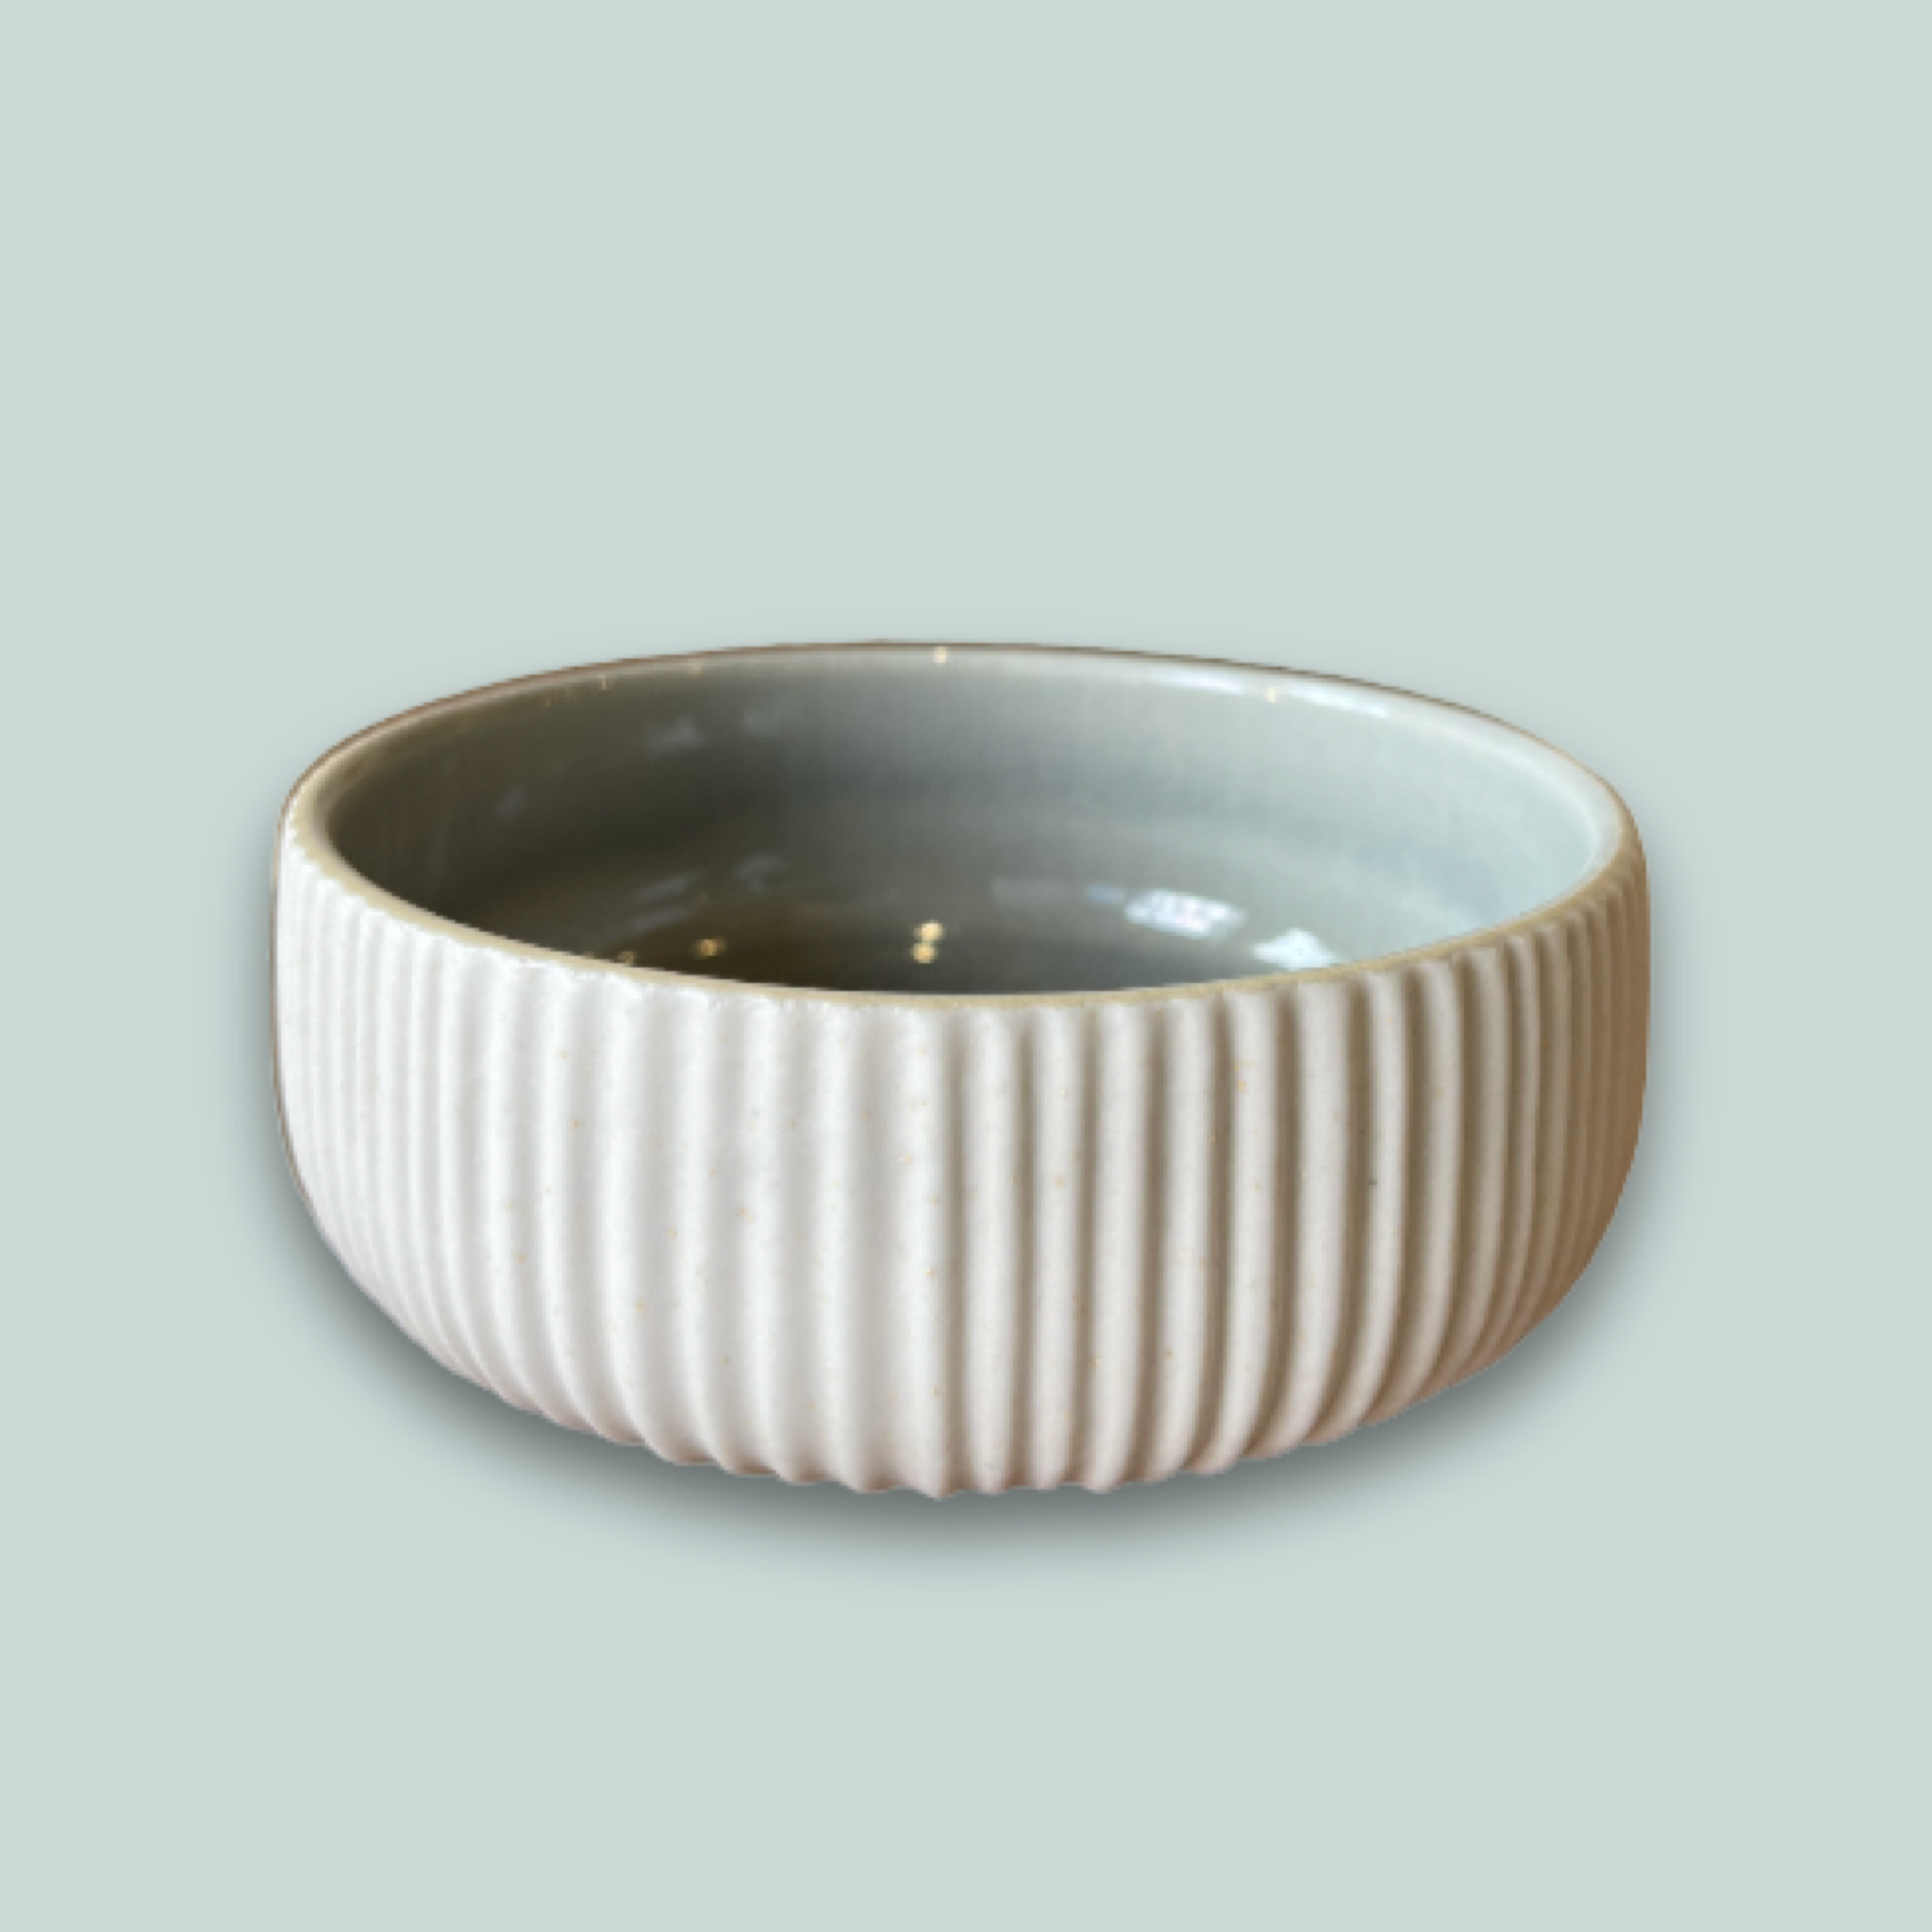 BLUE WAVY BOWL by Suuuper